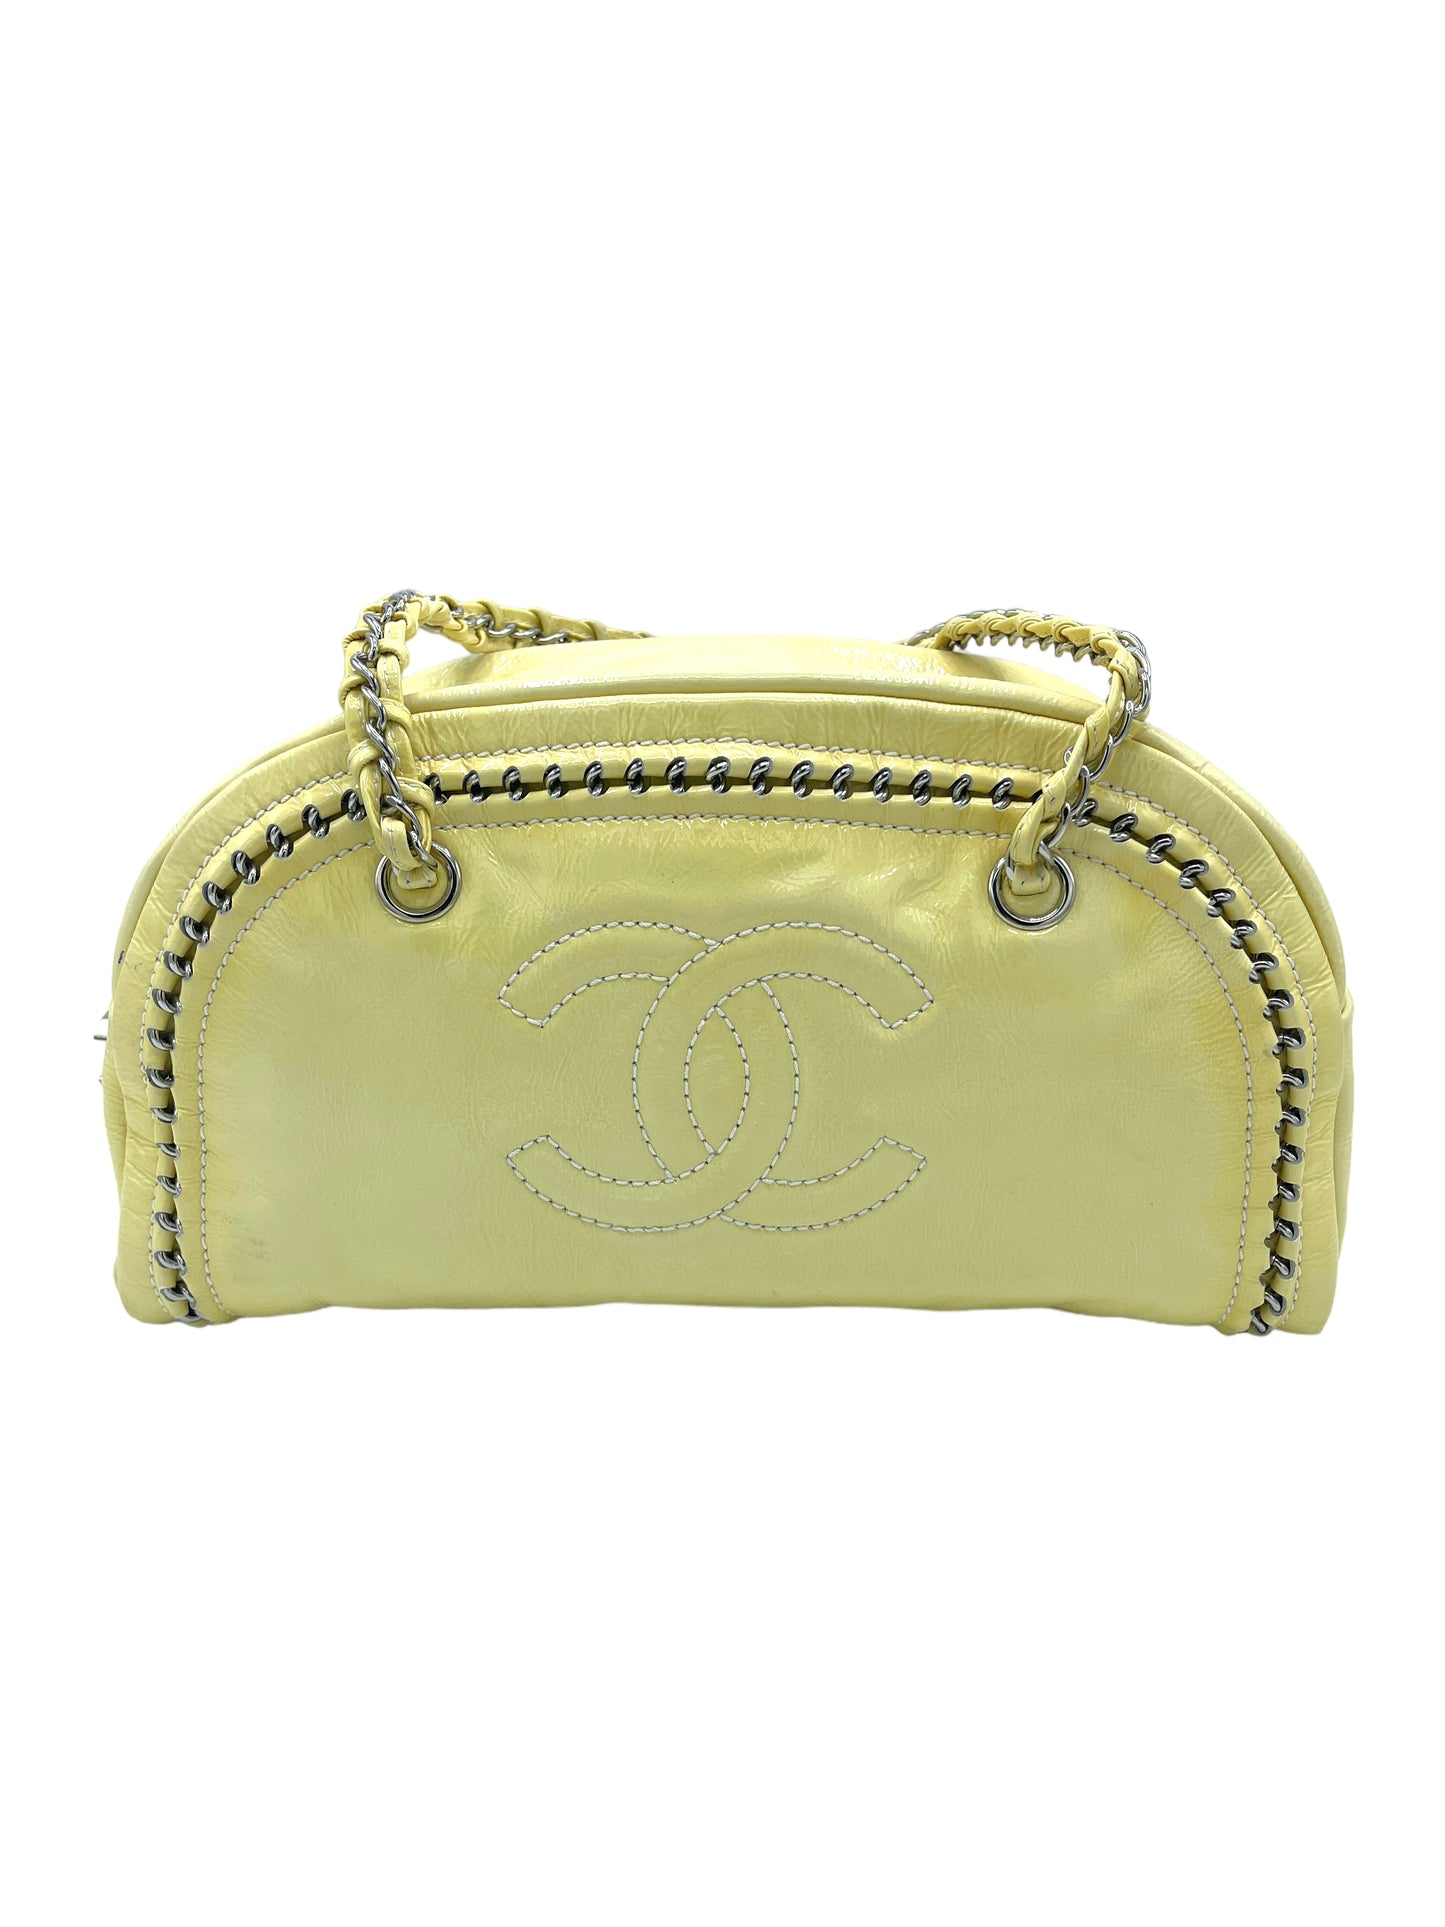 Chanel Yellow Patent Leather Luxe Ligne Bowler Bag